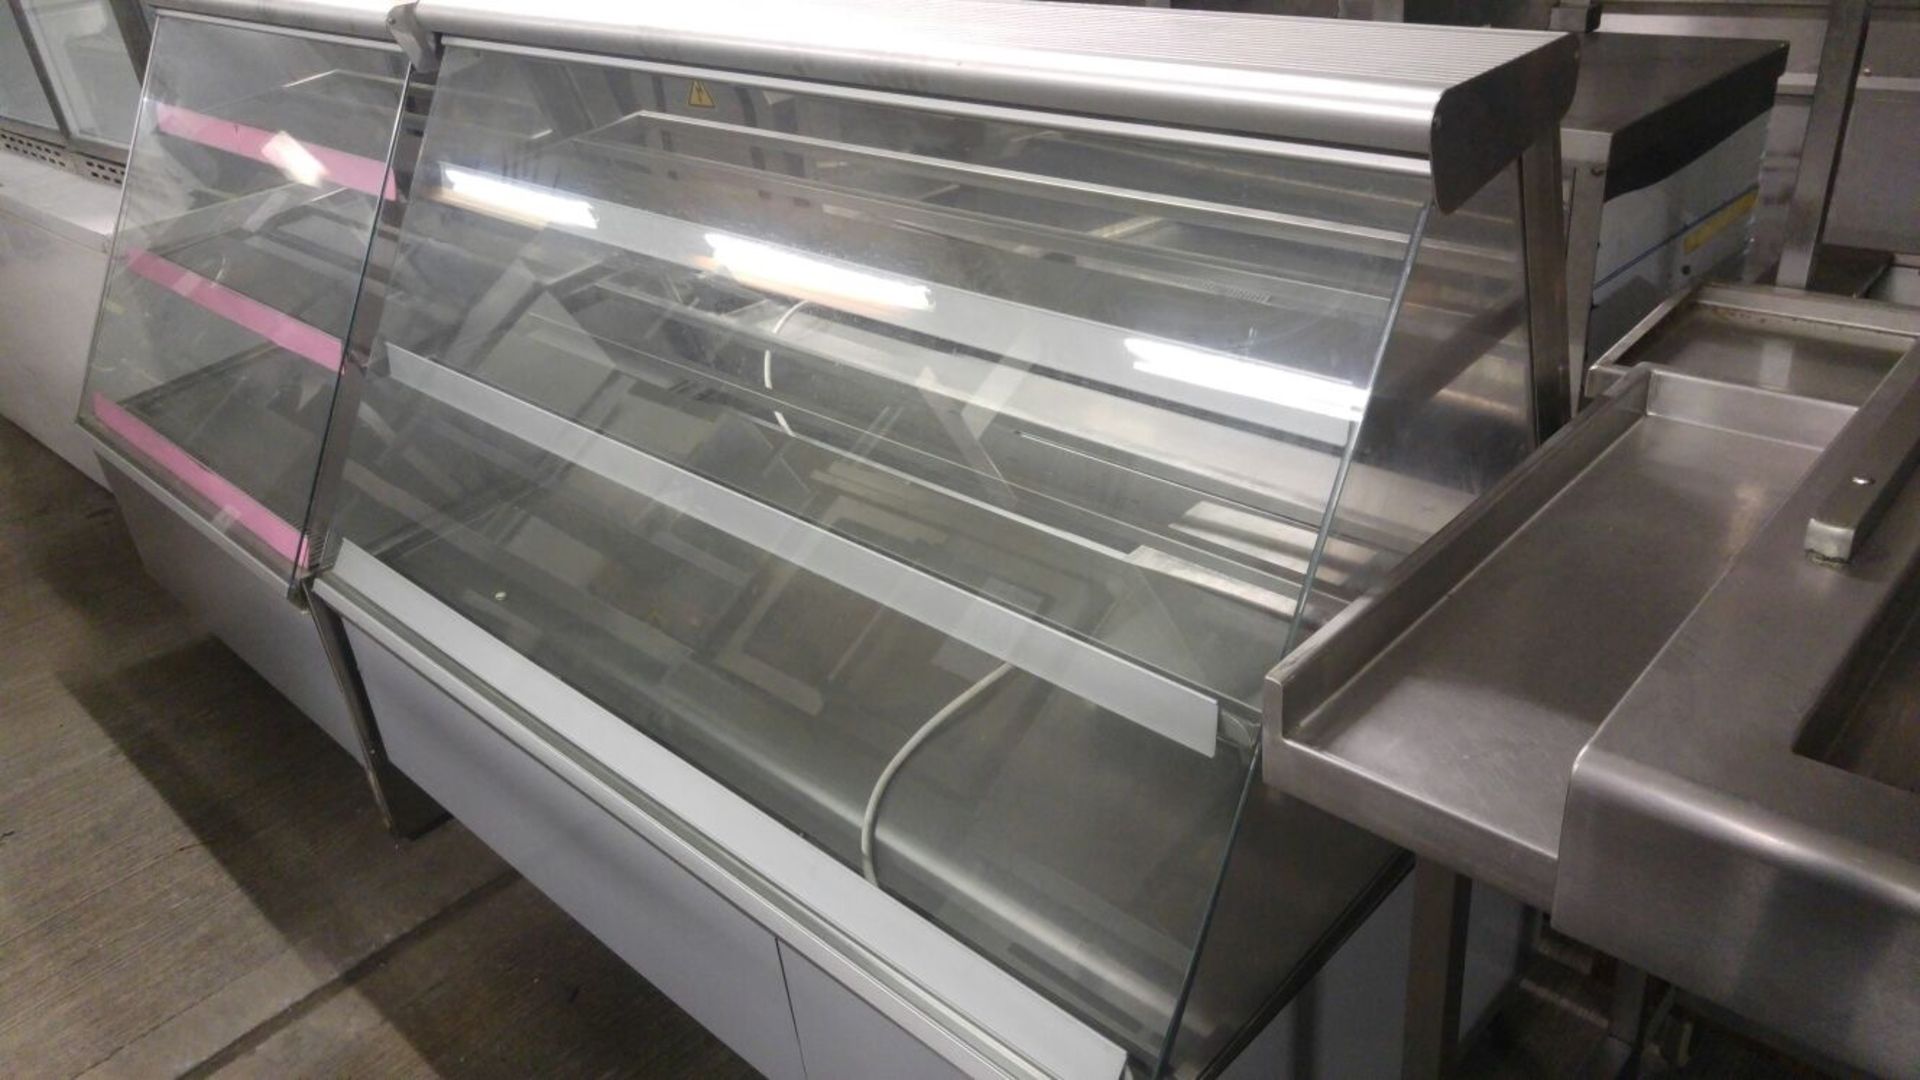 Display unit Refrigerated serve over counter Refrigerated Serve over cabinet with under storage.